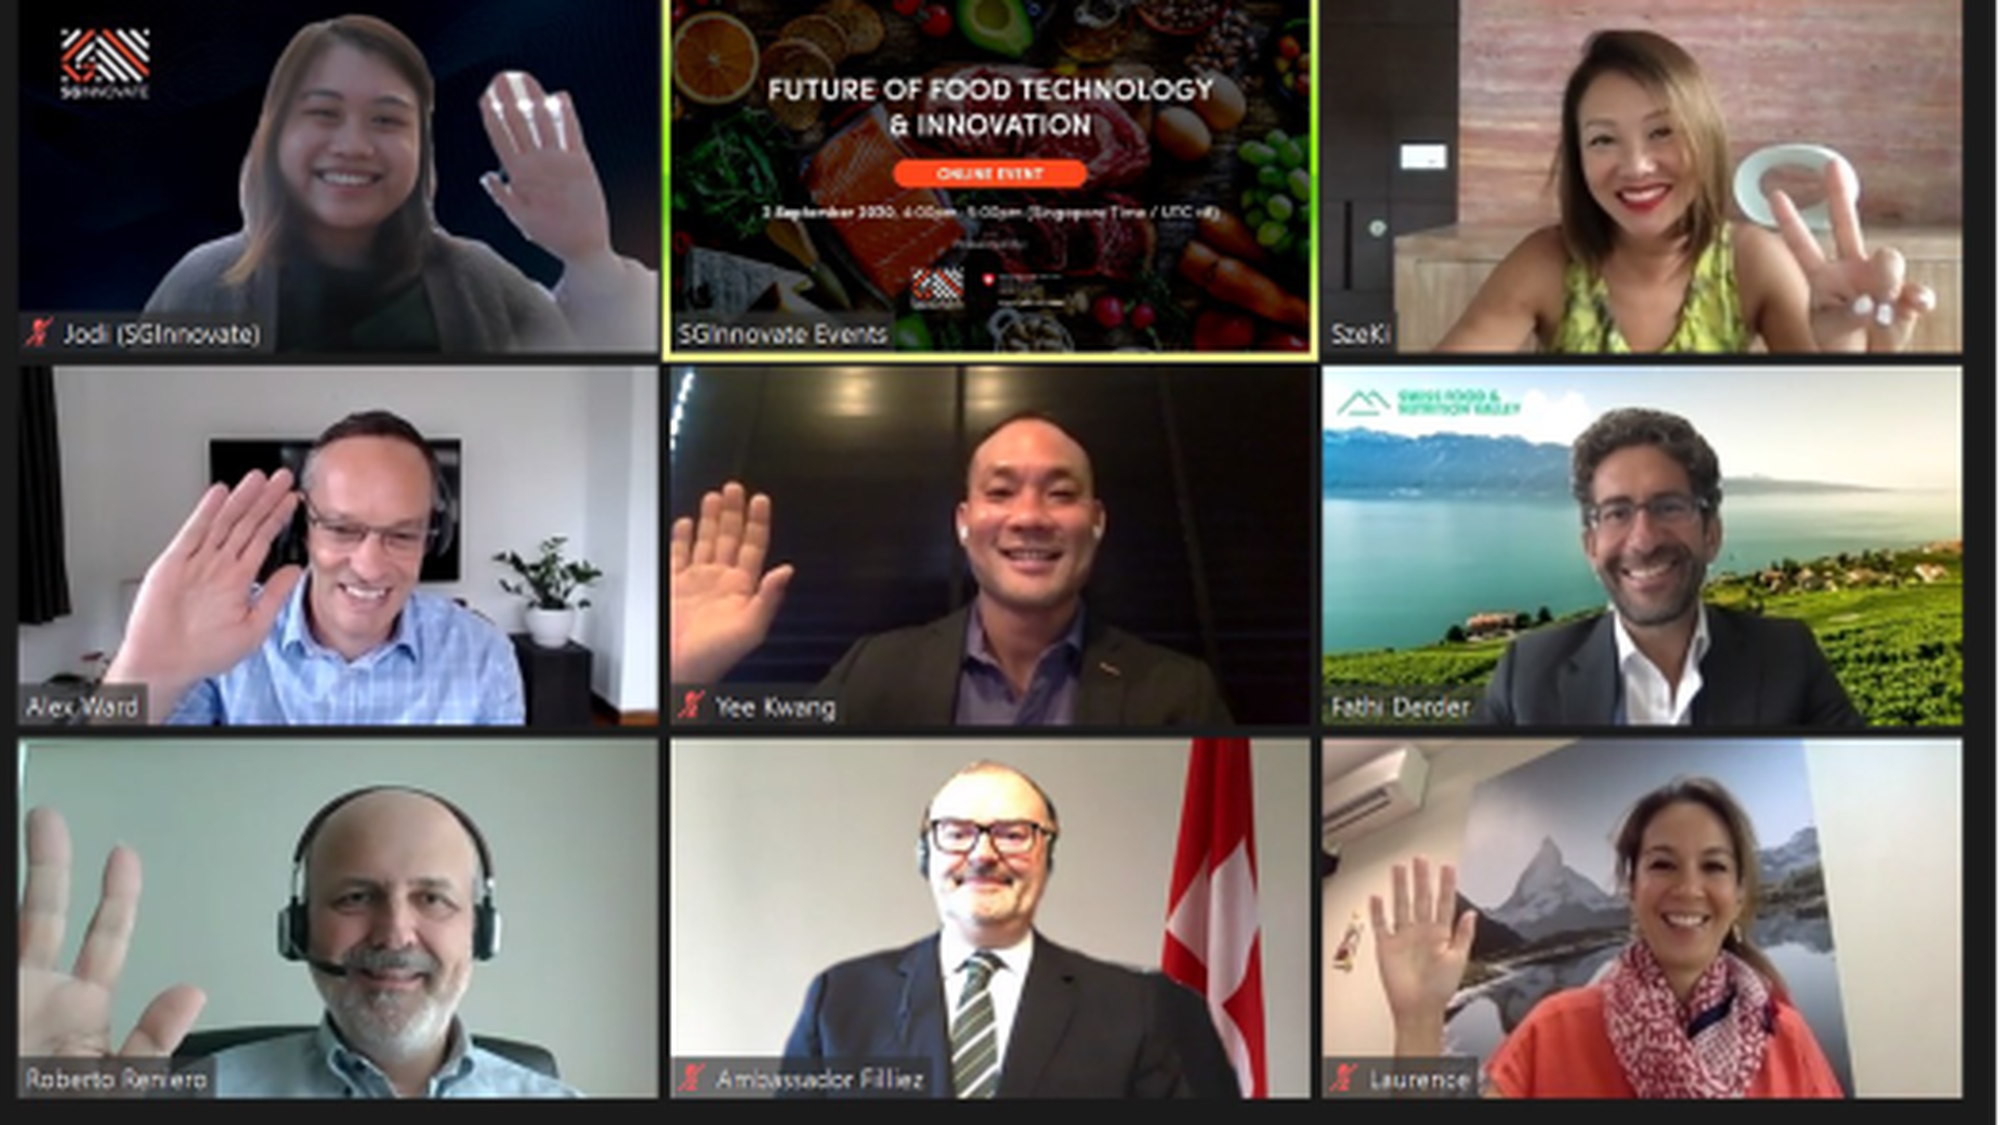 Open discussion on the Future of Food Technology and Innovation via Zoom